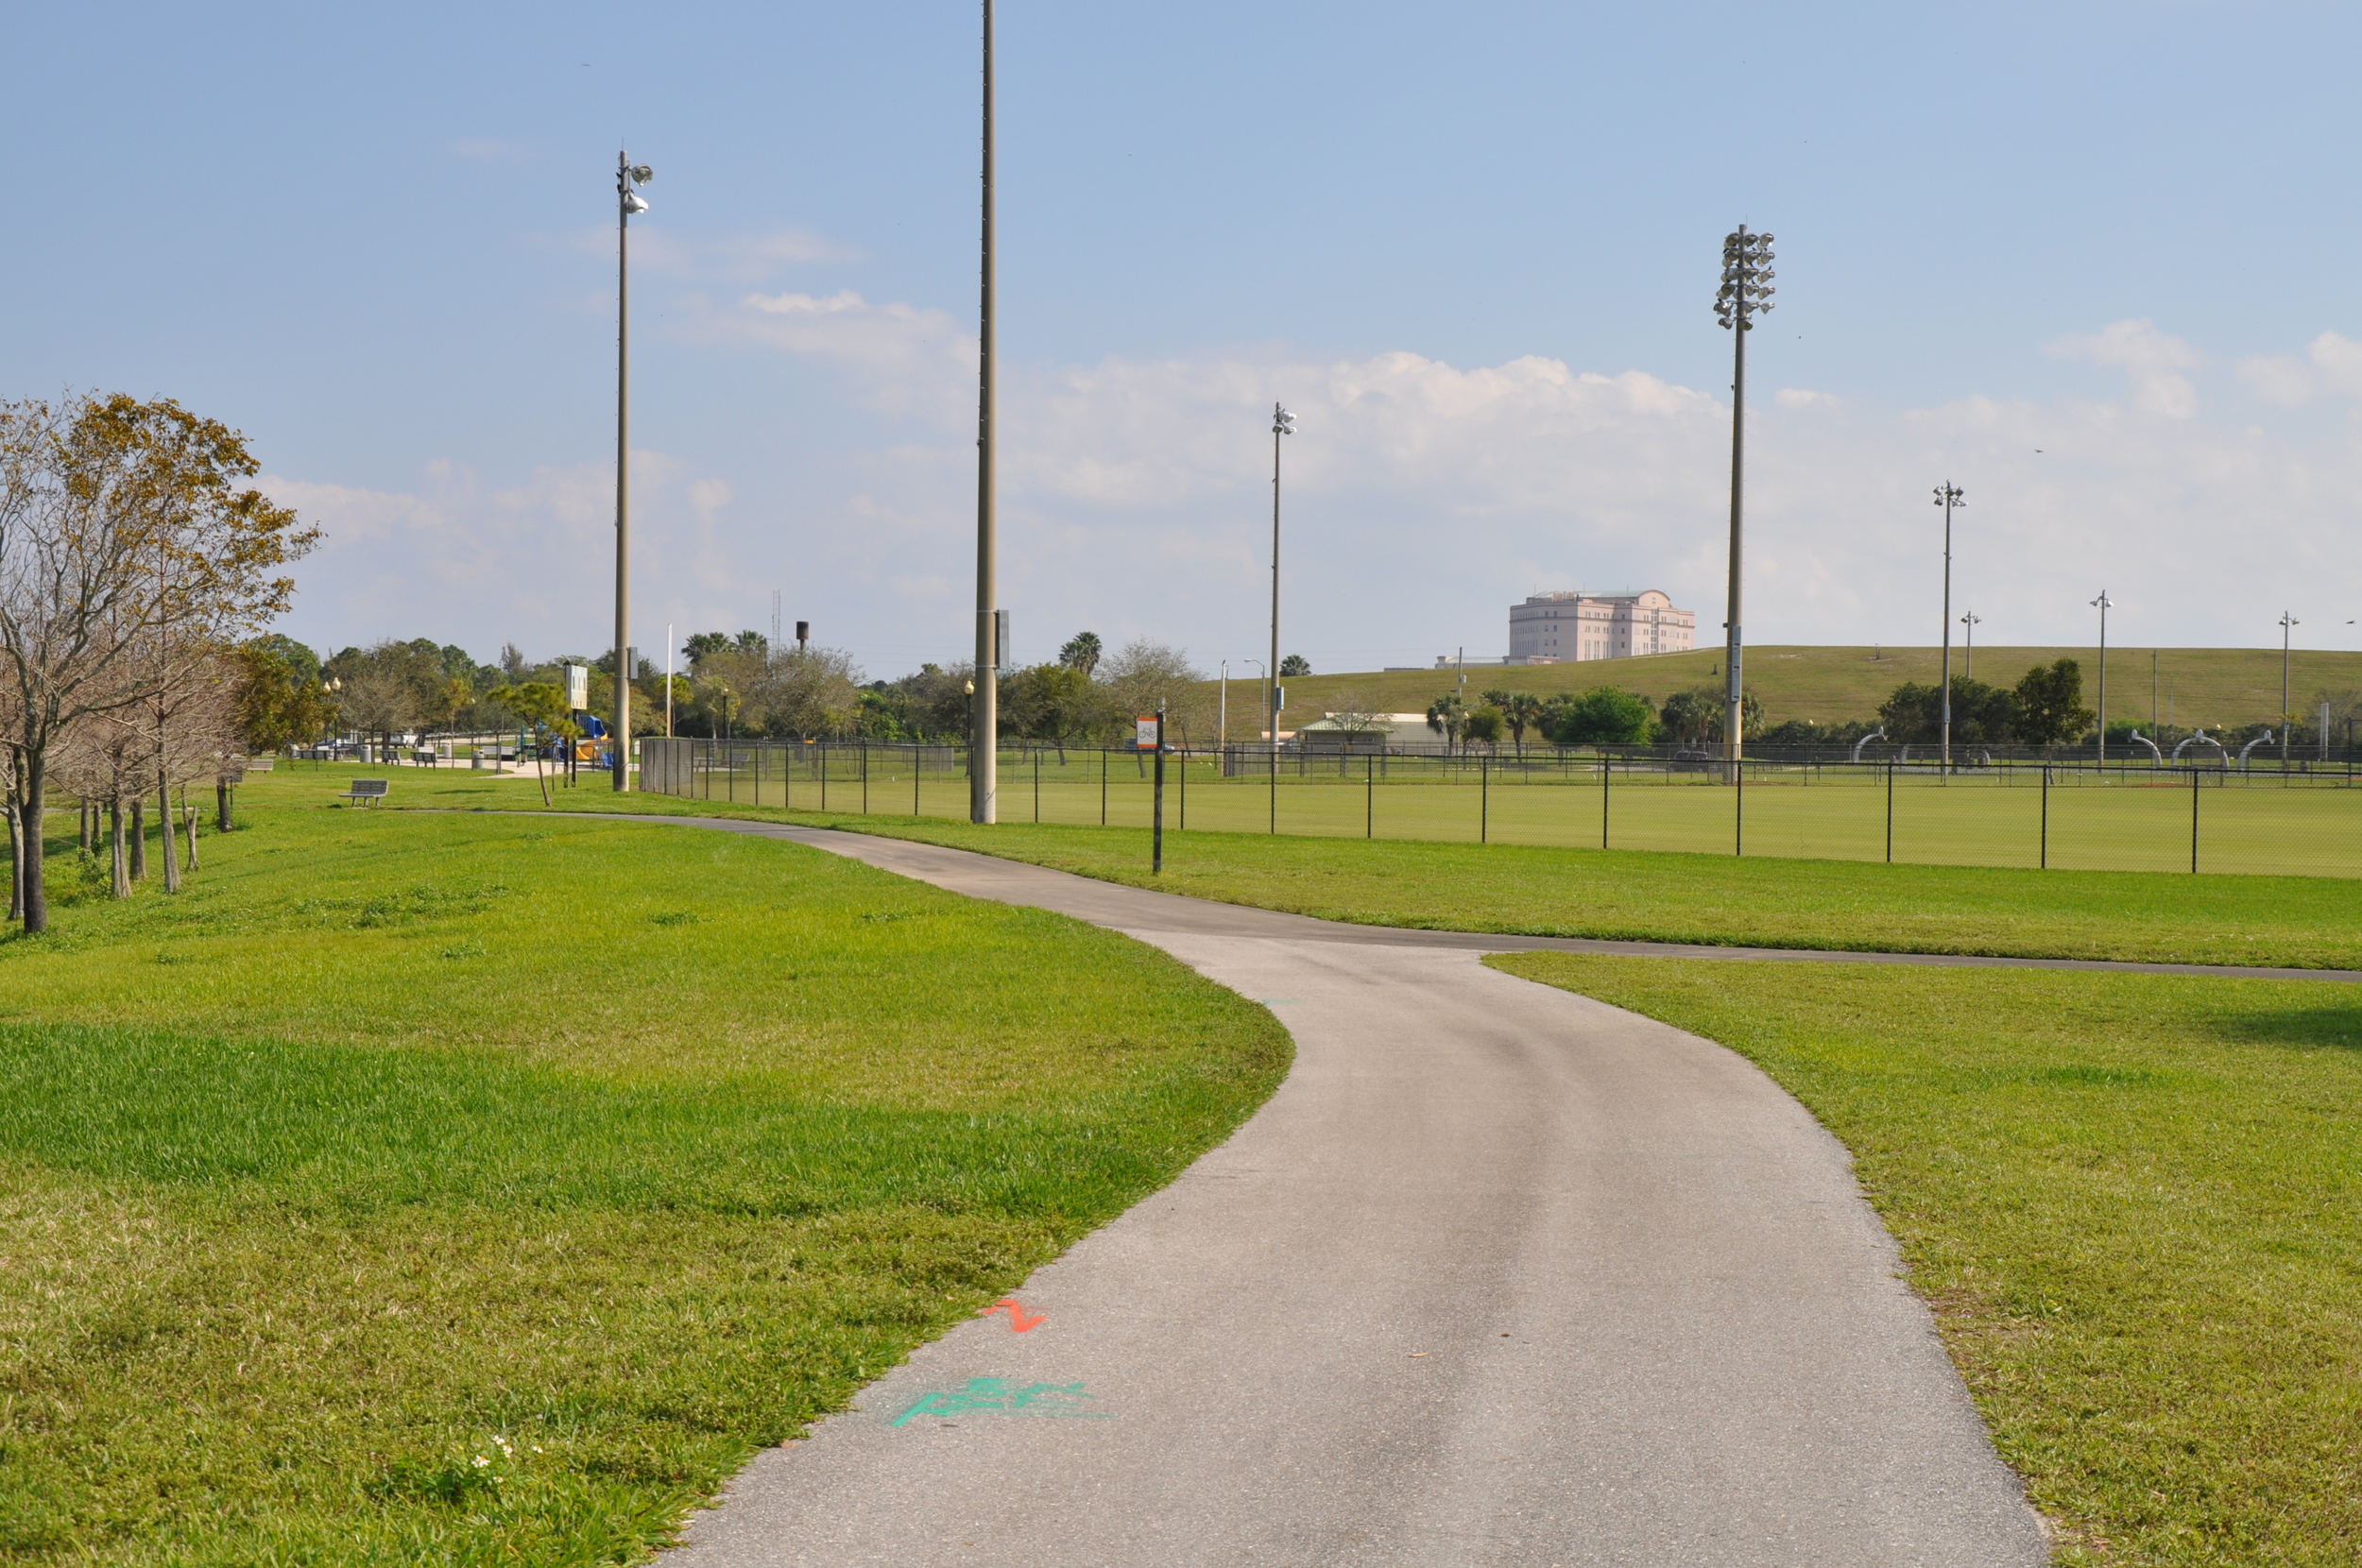 Dyer Landfill Reclamation Palm Beach County Florida Passive and Active Recreation.JPG